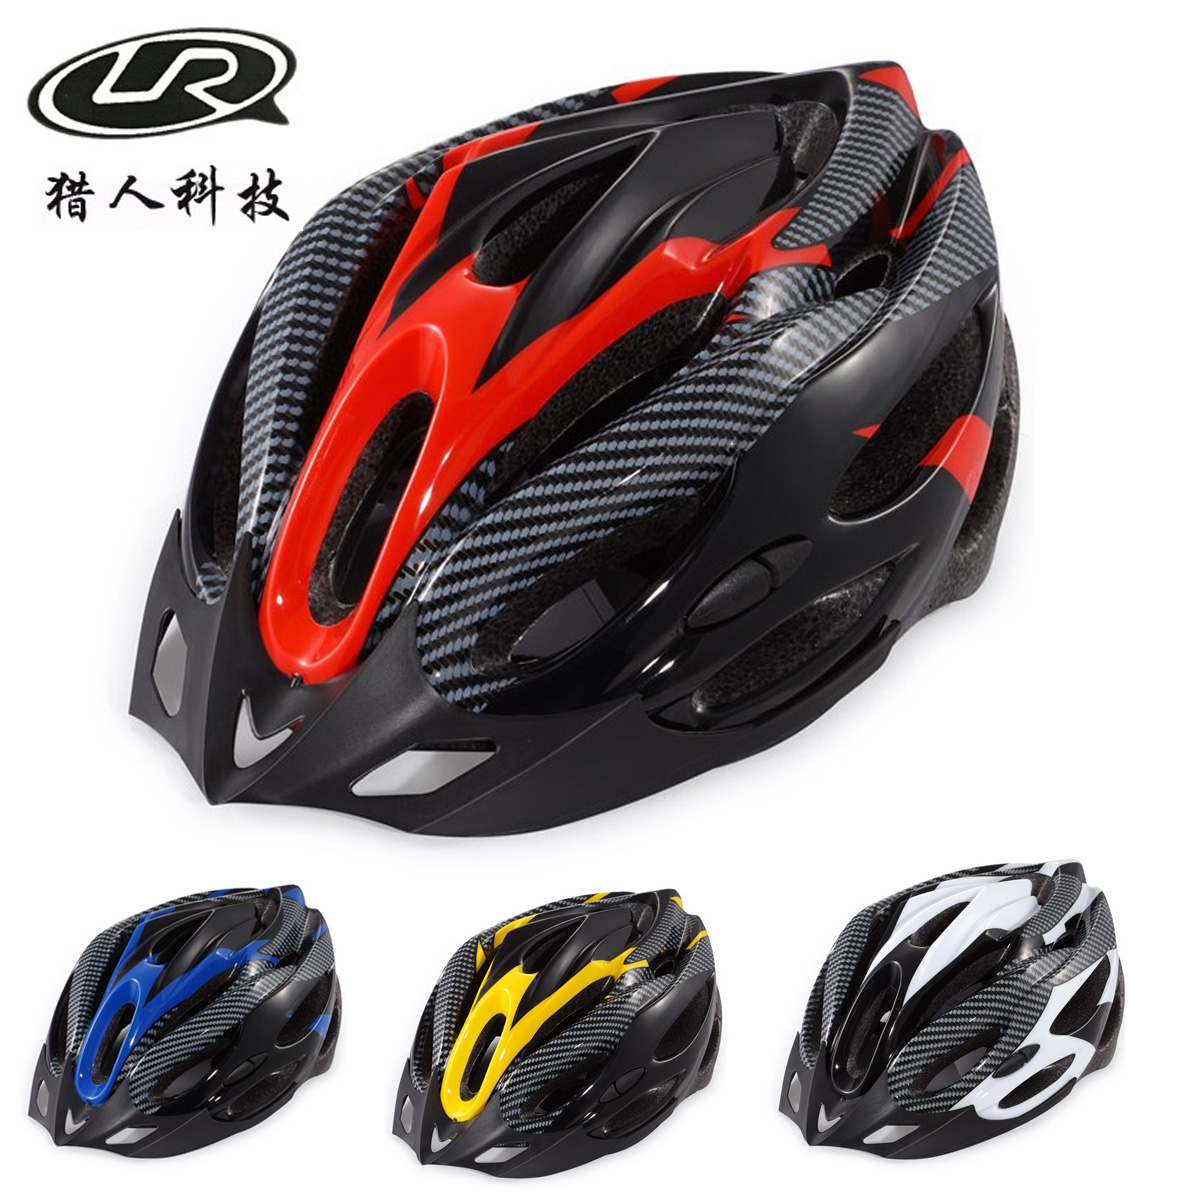 Mountainous bicycle magnetic suction goggles integrated helmet-mounted glasses road vehicle safety hat